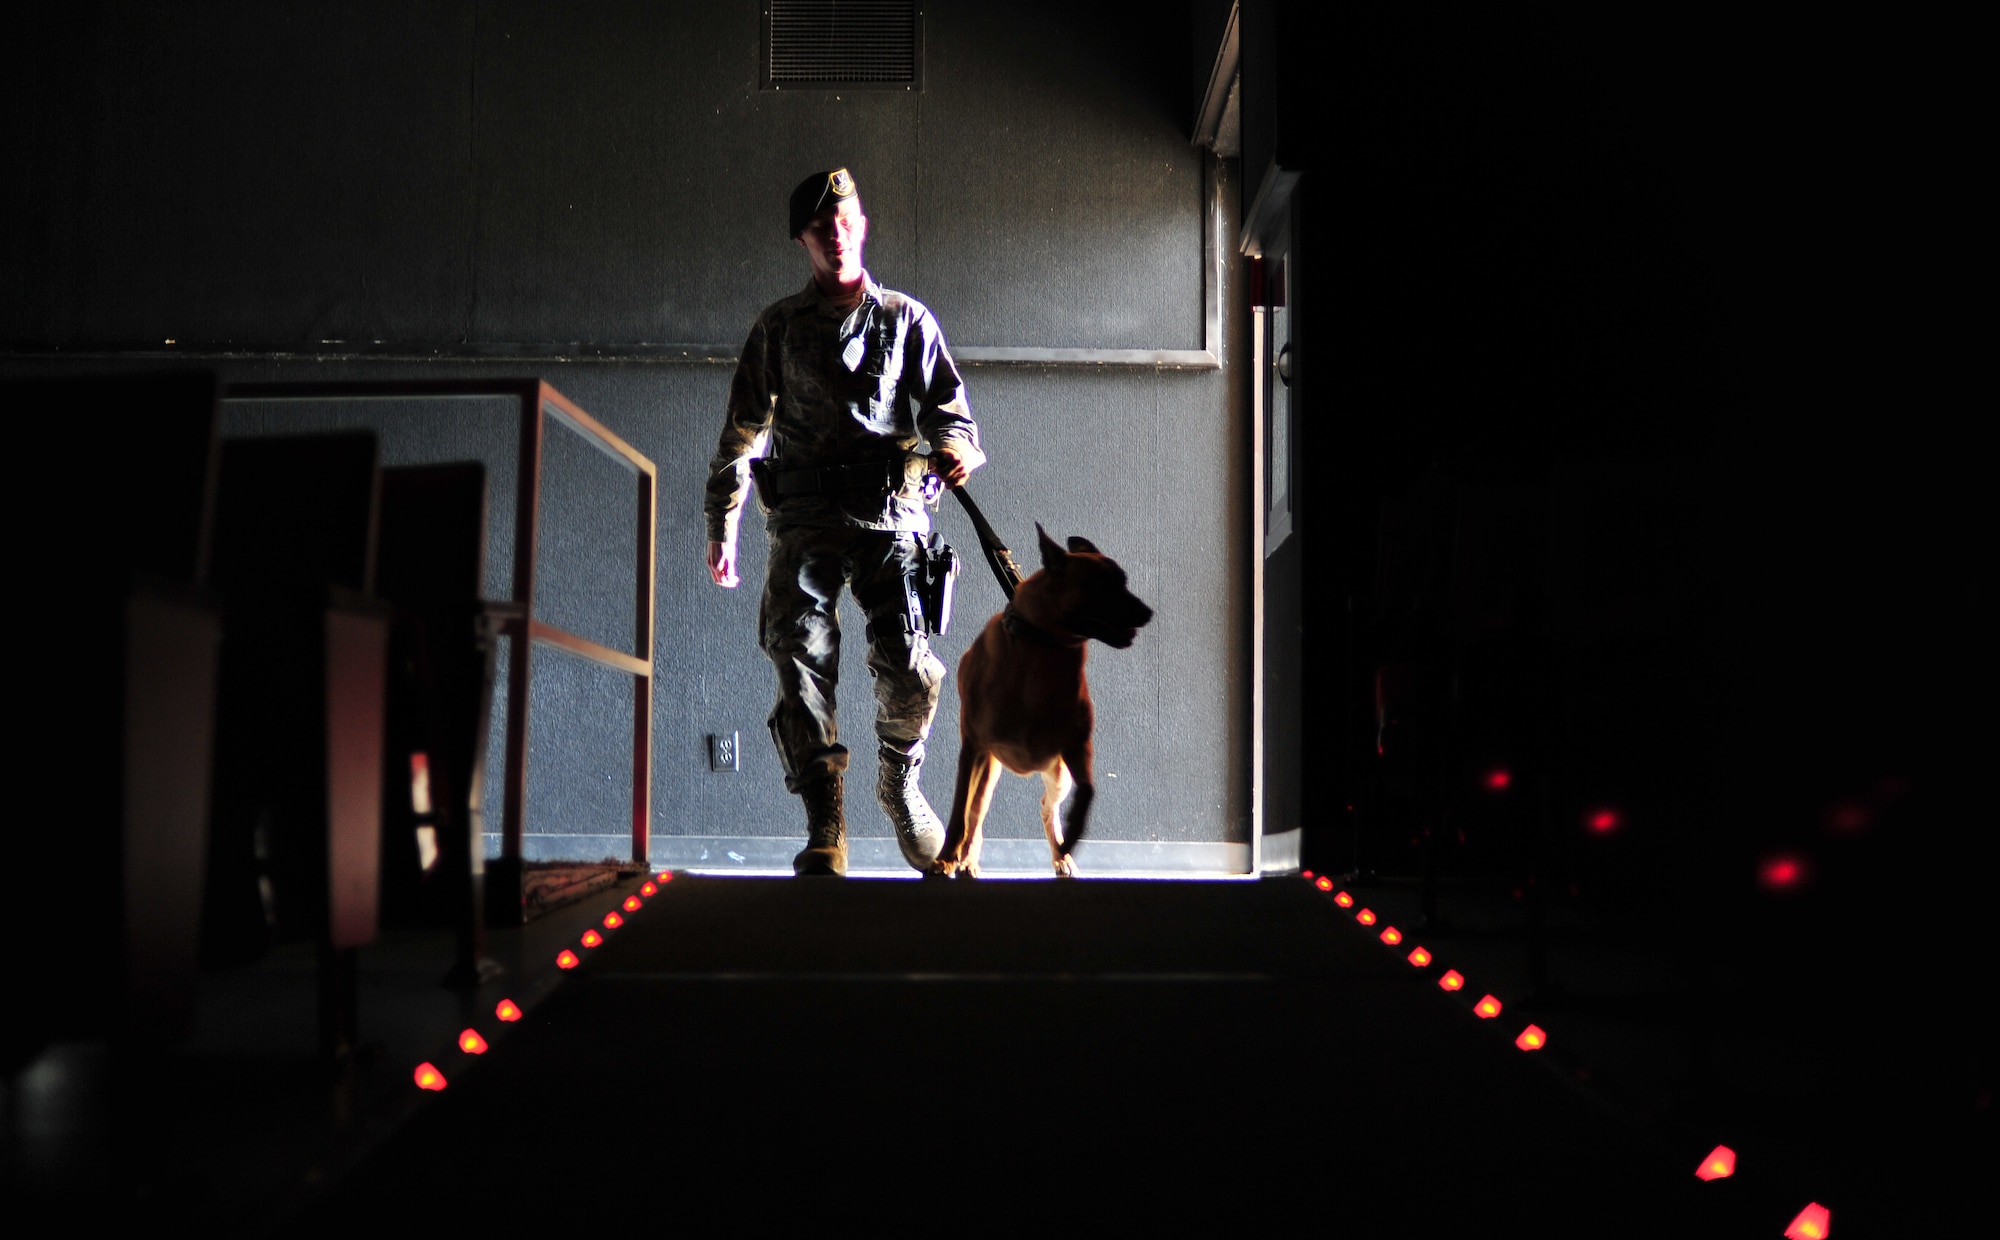 Staff Sgt. Justin Benfer searches the base theater with Uutah during a training exercise at Fairchild Air Force Base, Wash., March 21, 2013. The 92nd Security Forces Squadron is home to eight military working dogs. Benfer and Uutah are military working dog handler and K-9 assigned to the 92nd SFS. (U.S. Air Force photo by Senior Airman Taylor Curry)